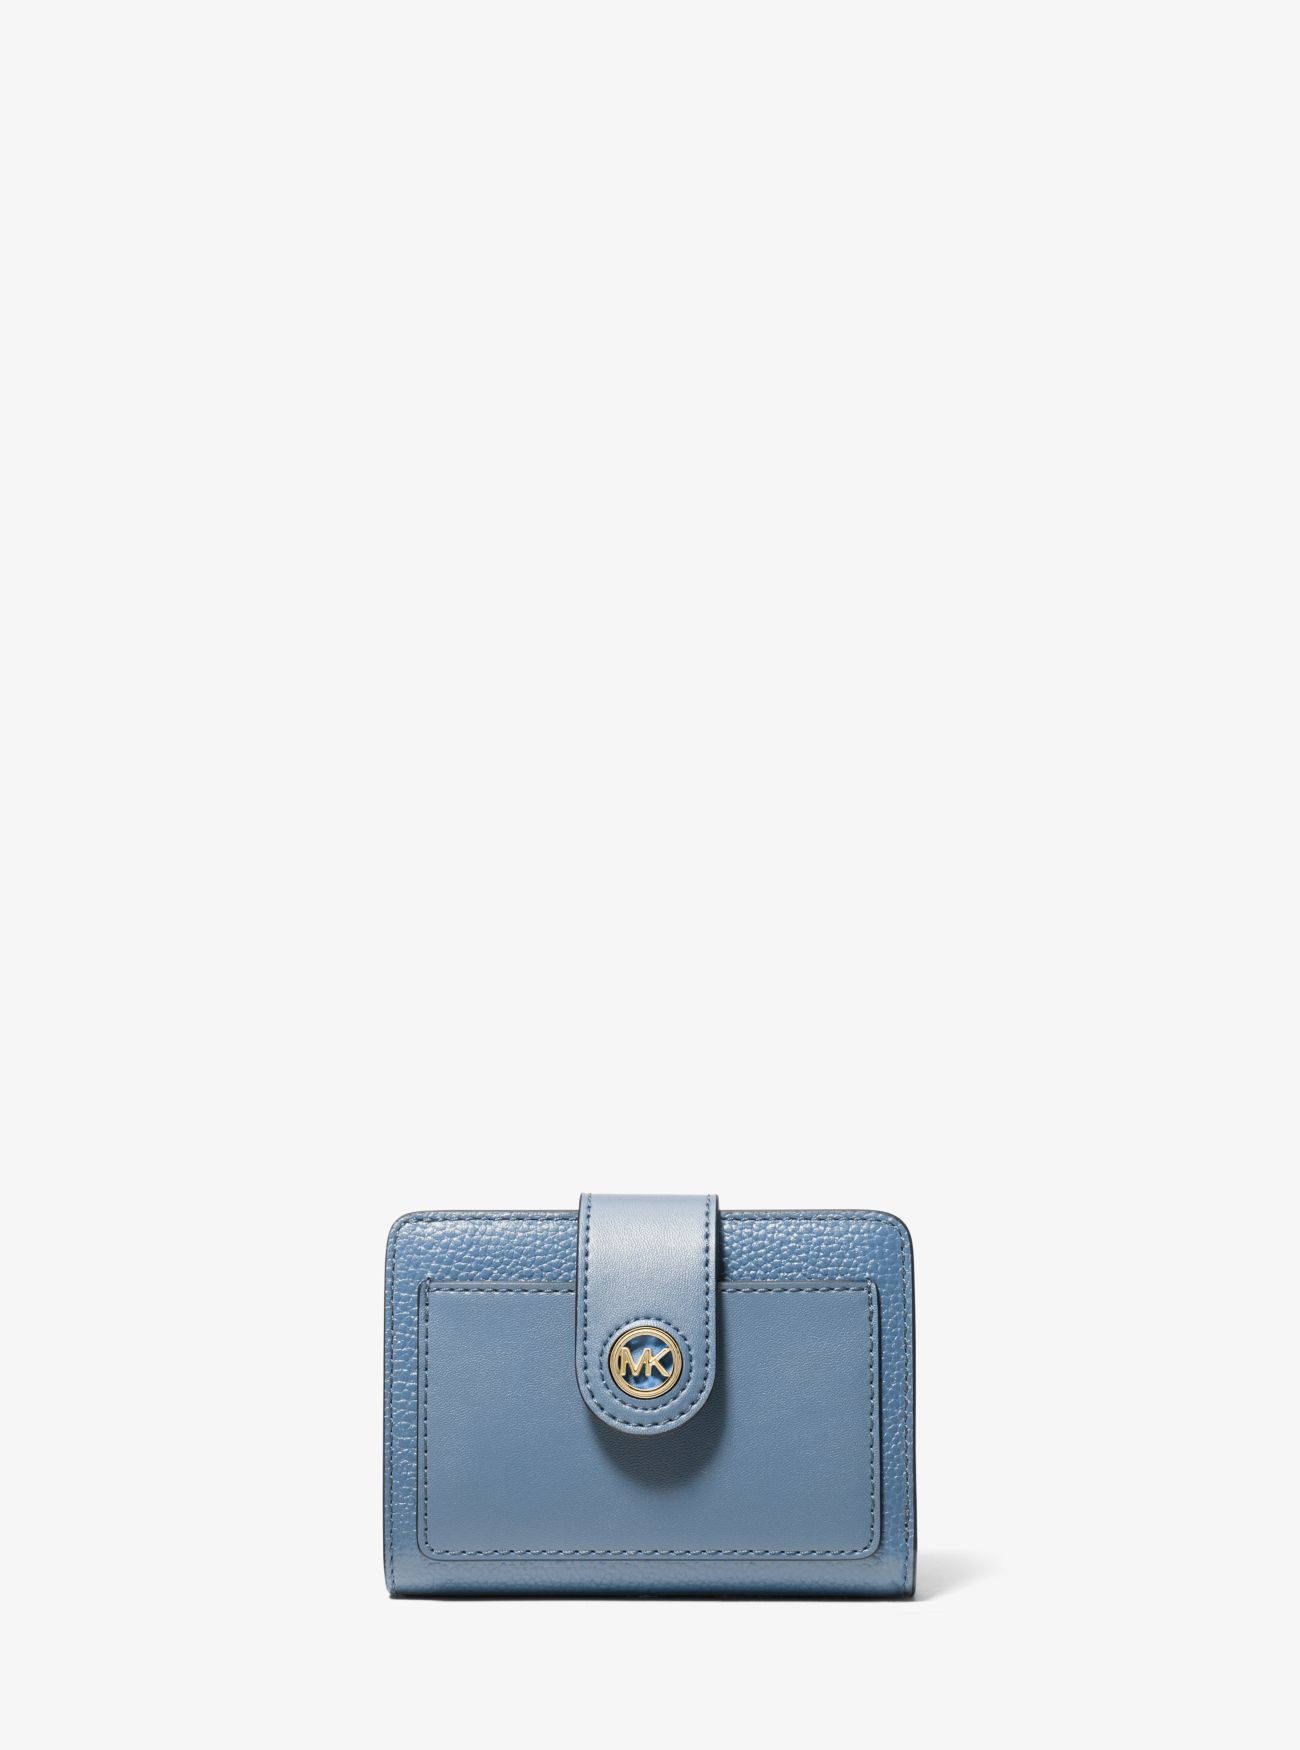 MK Small Leather Wallet - Blue - Michael Kors